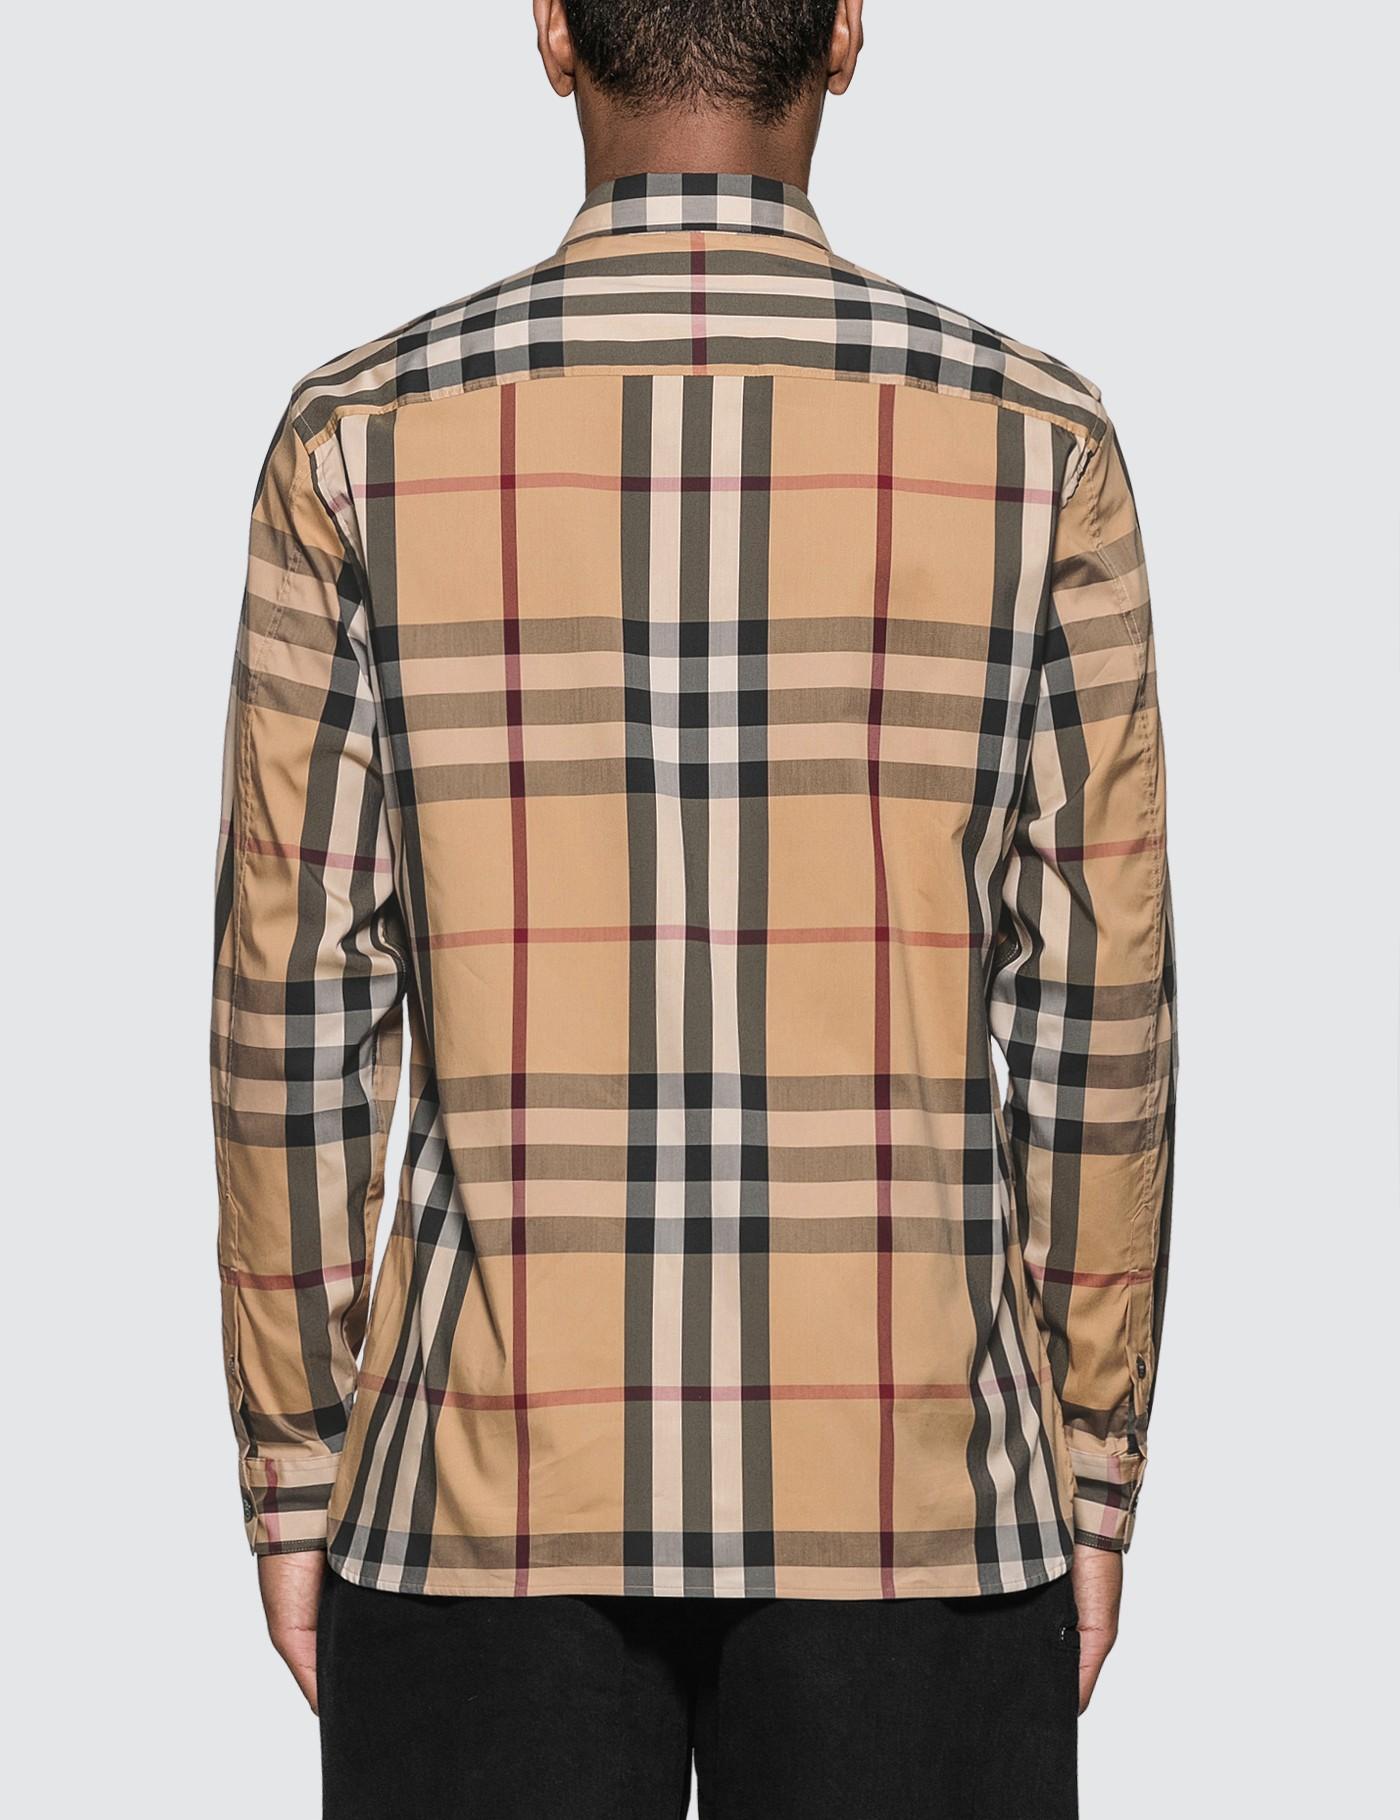 Burberry Vintage Check Shirt in Beige (Natural) for Men - Lyst